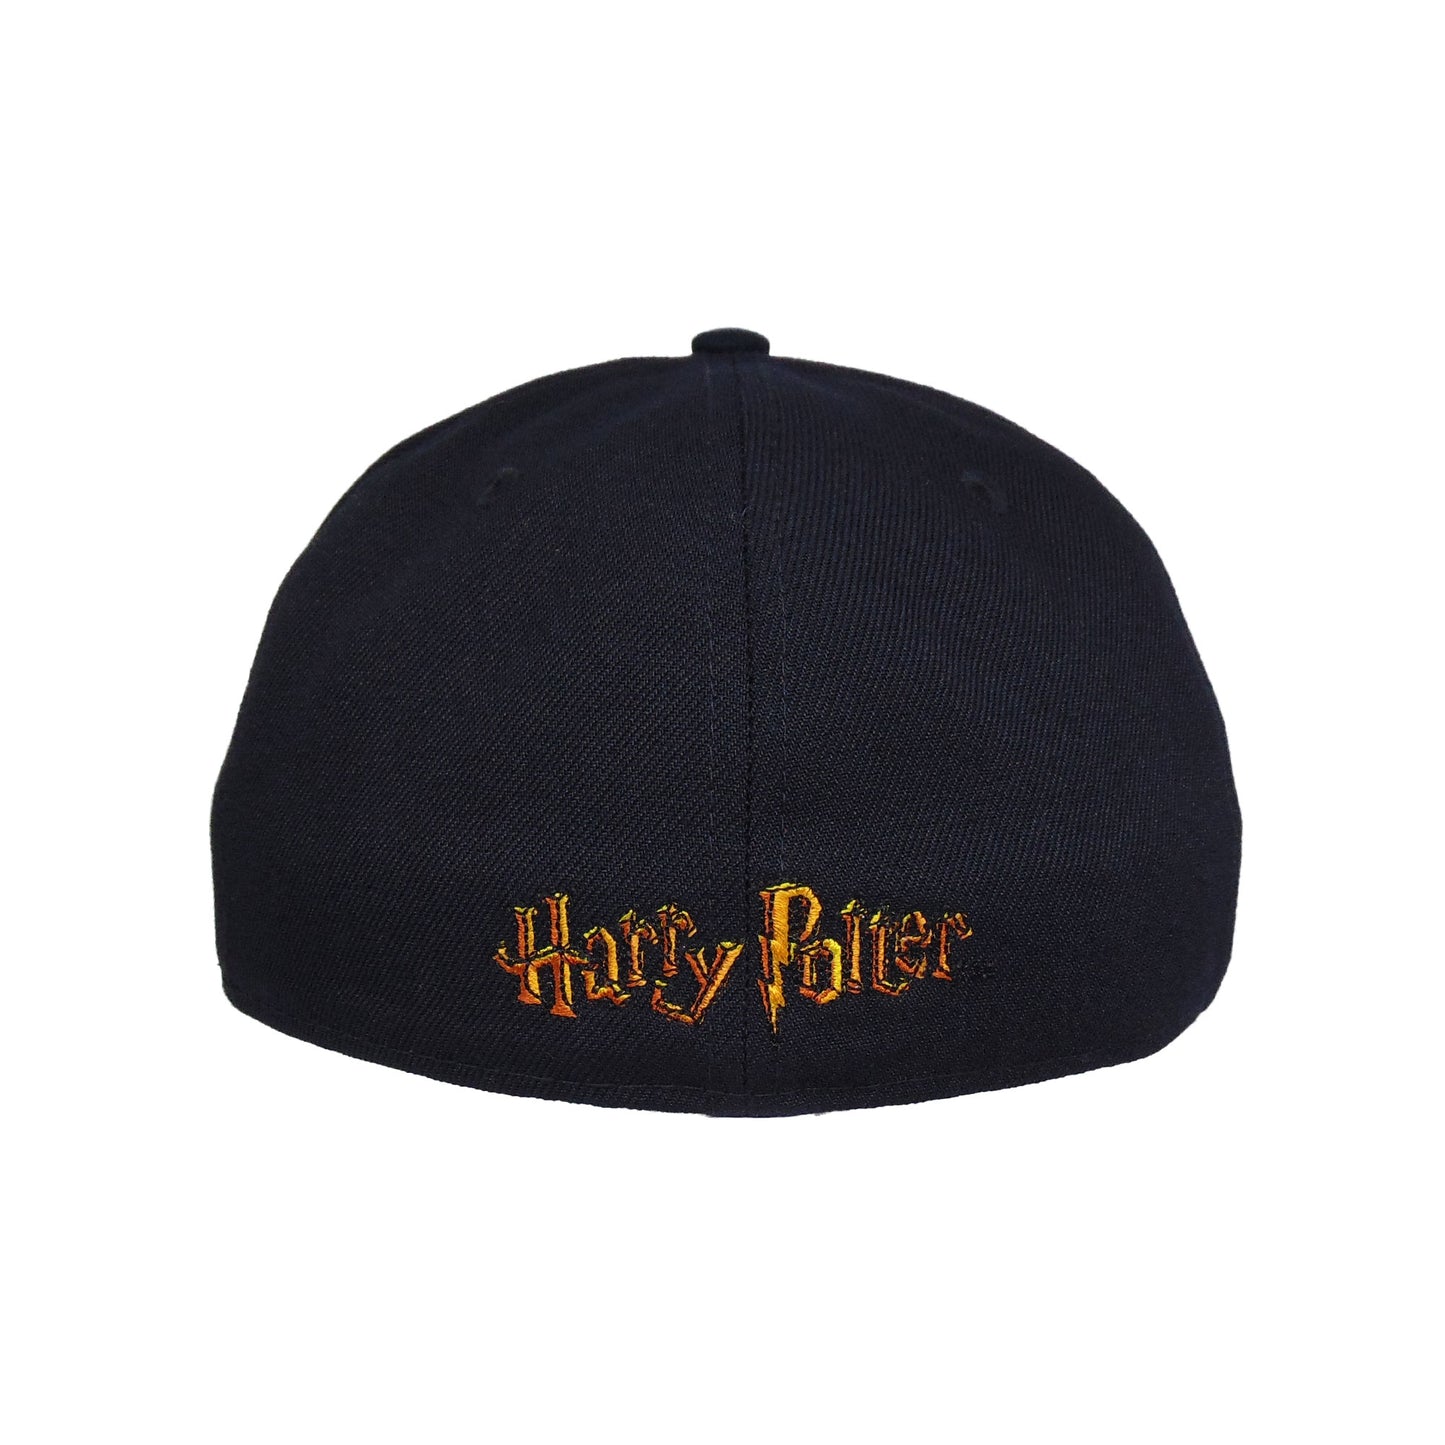 Harry Potter x JF exclusive New Era 59FIFTY Cap Ravenclaw